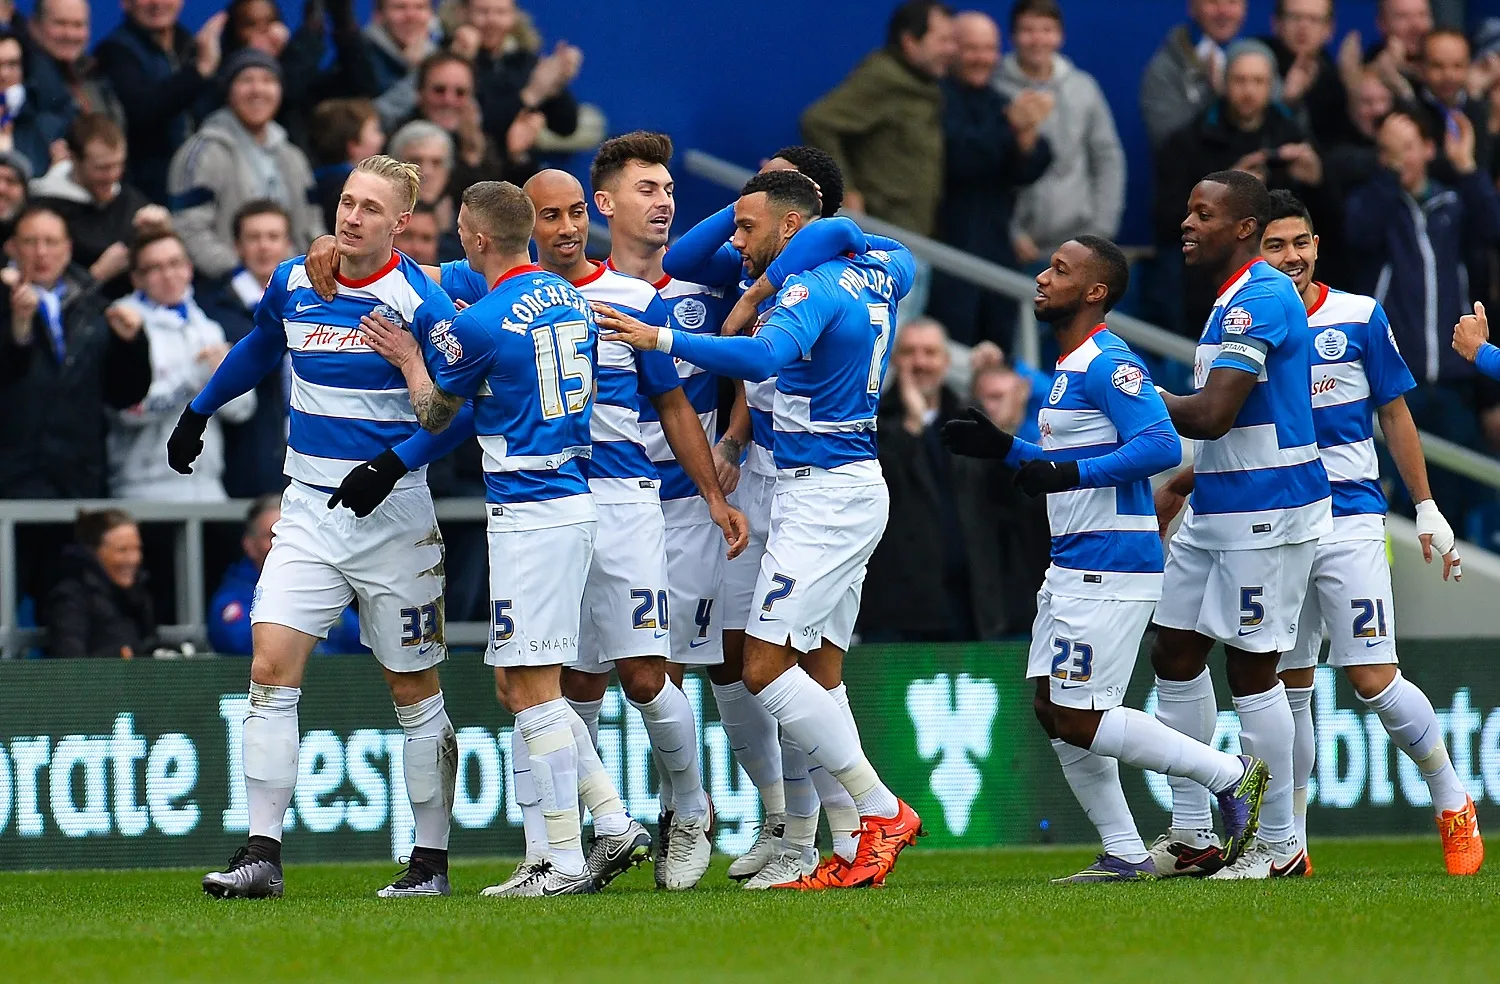 Queens Park Rangers launch historic partnership with LGBT football club